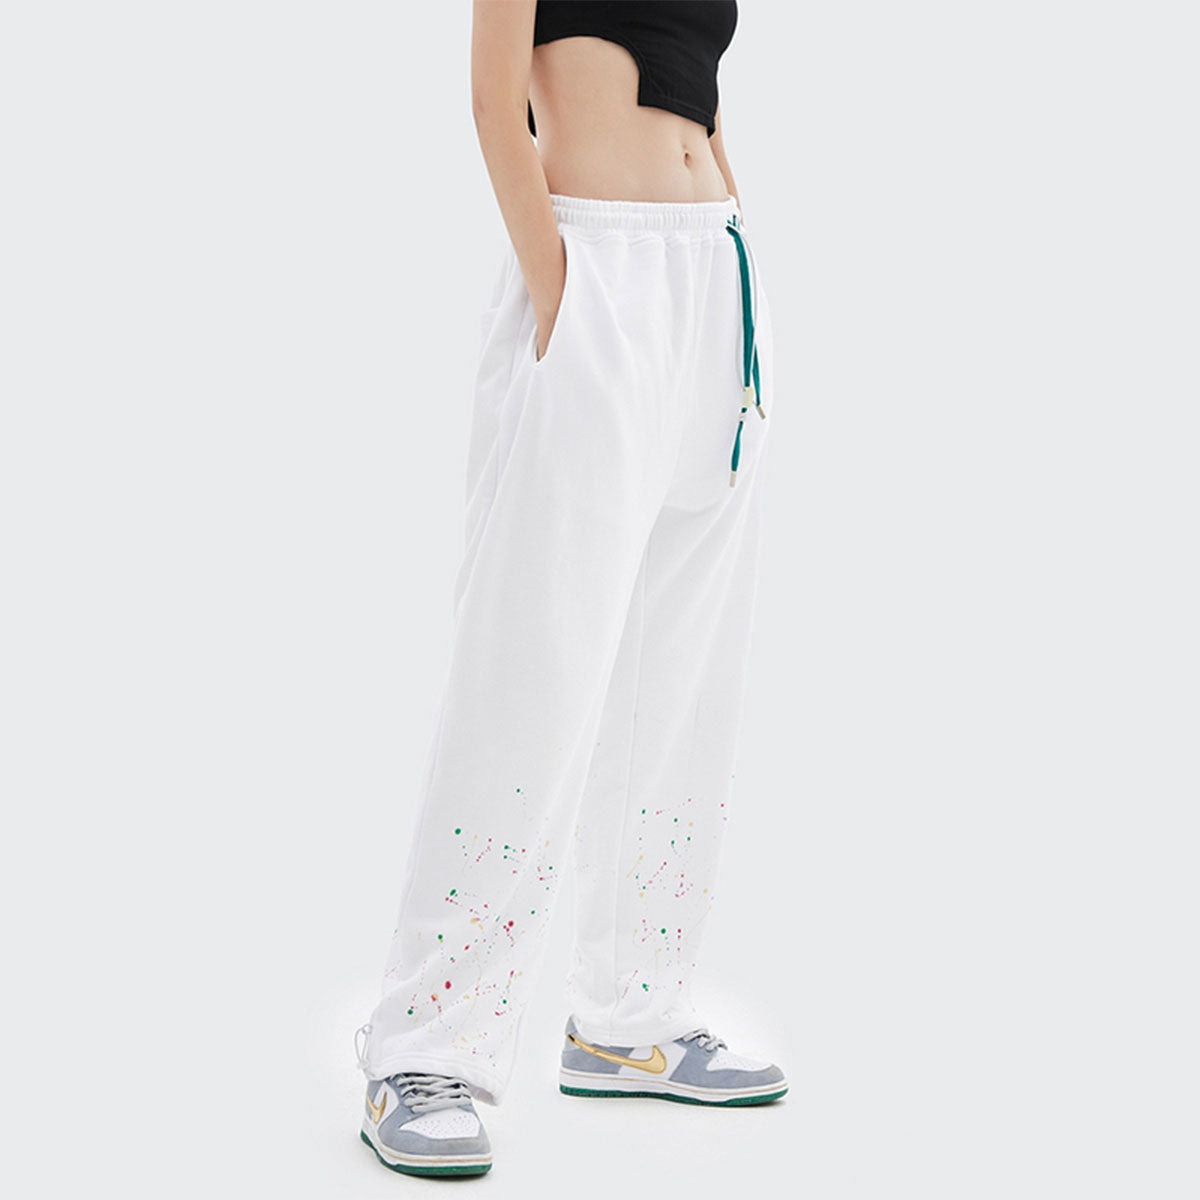 Buy Casual Drawstring Sports Straight Pants by Body404 by Body404